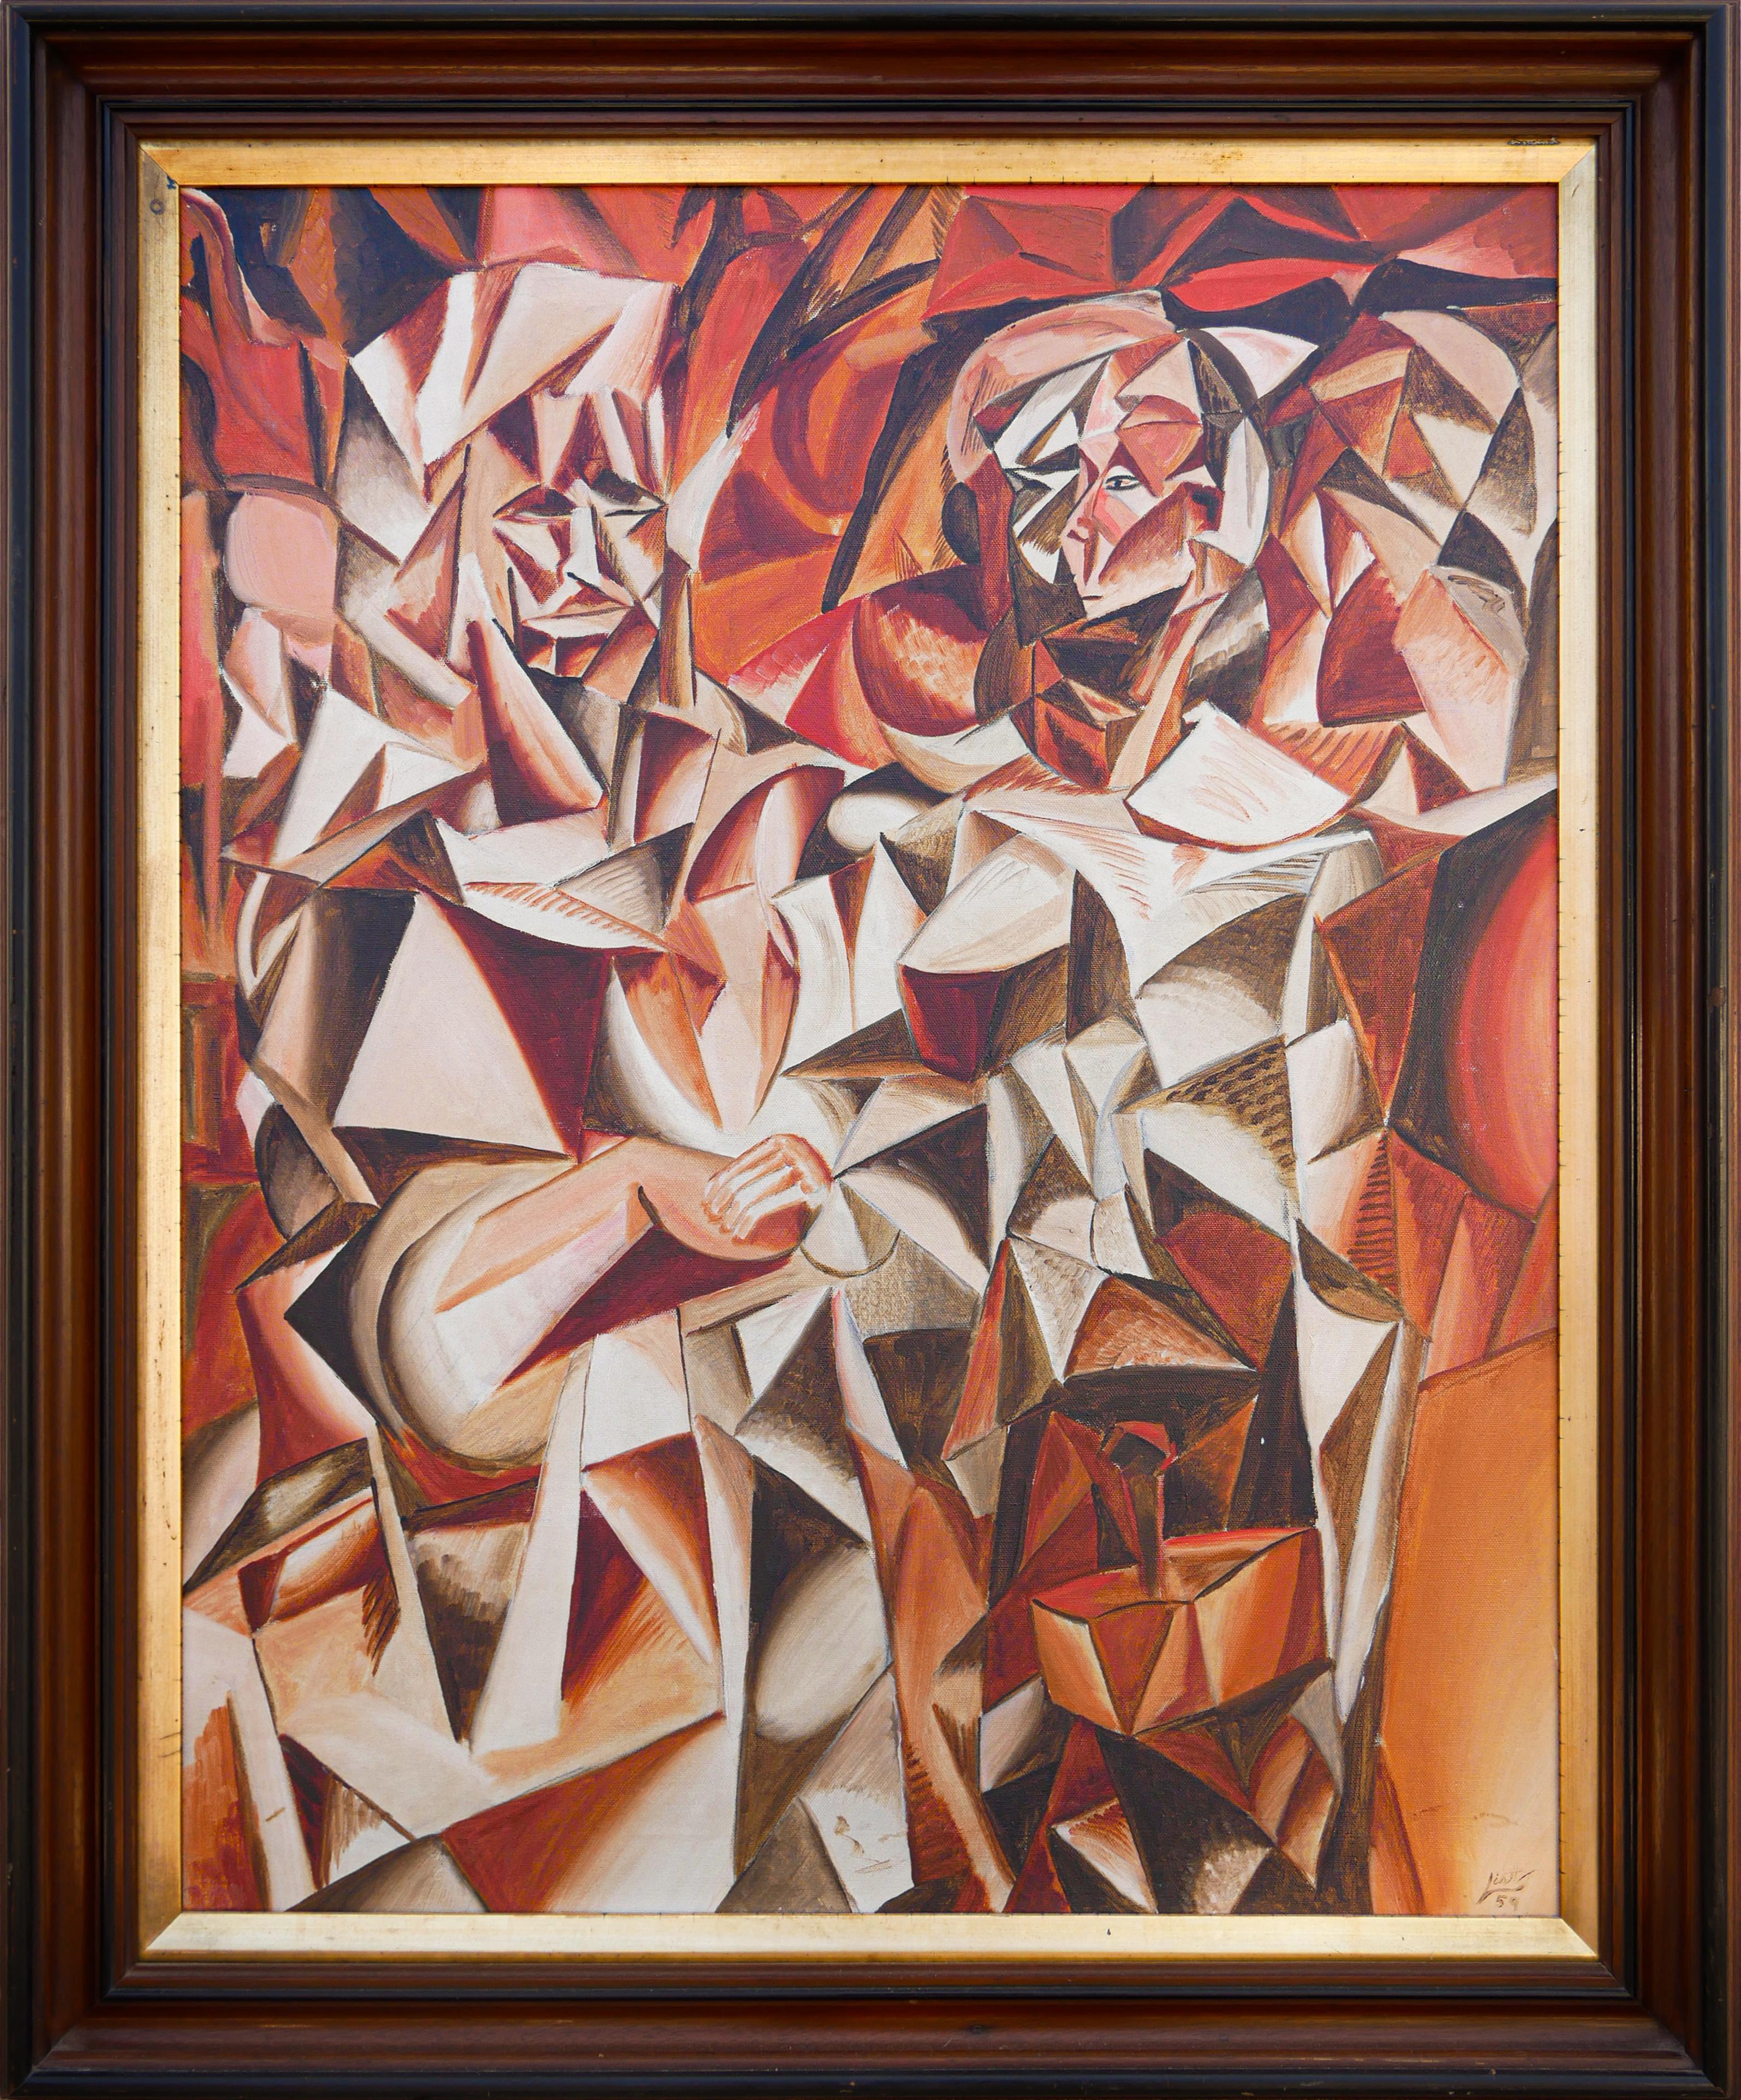 Roy List Abstract Painting - “Dienstag” Orange, Red, and Brown Abstract Cubist Figurative Painting